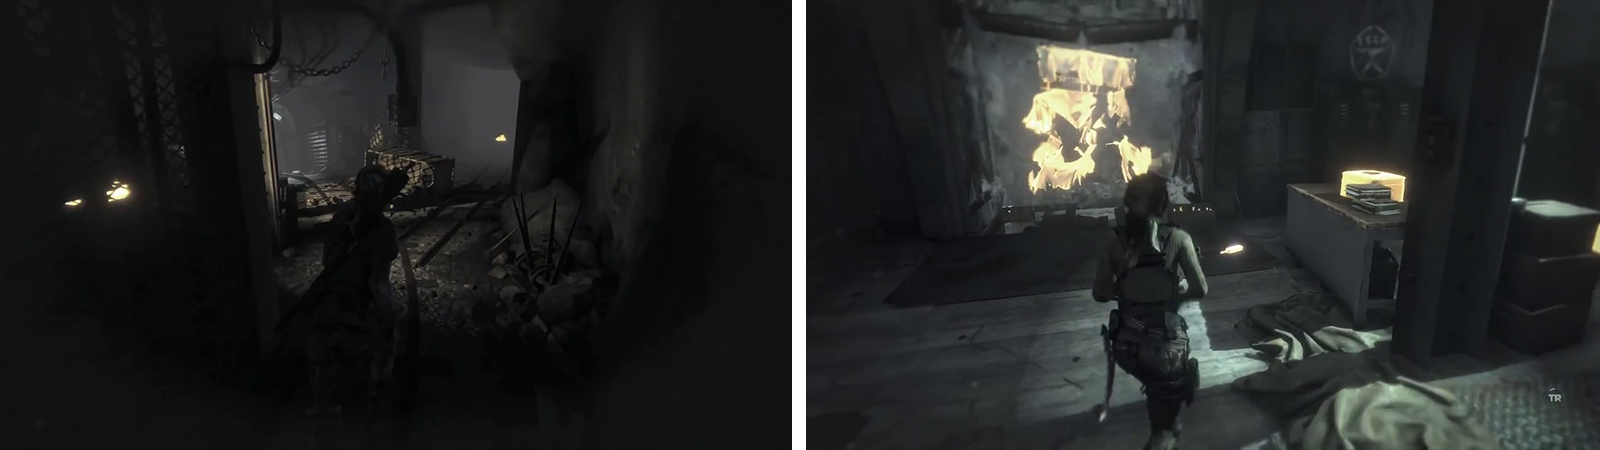 Follow the track to the left at the fork (left). When you reach the office area, loot Relic 14 from the desk and craft a Molotov to destroy the blockage (right).